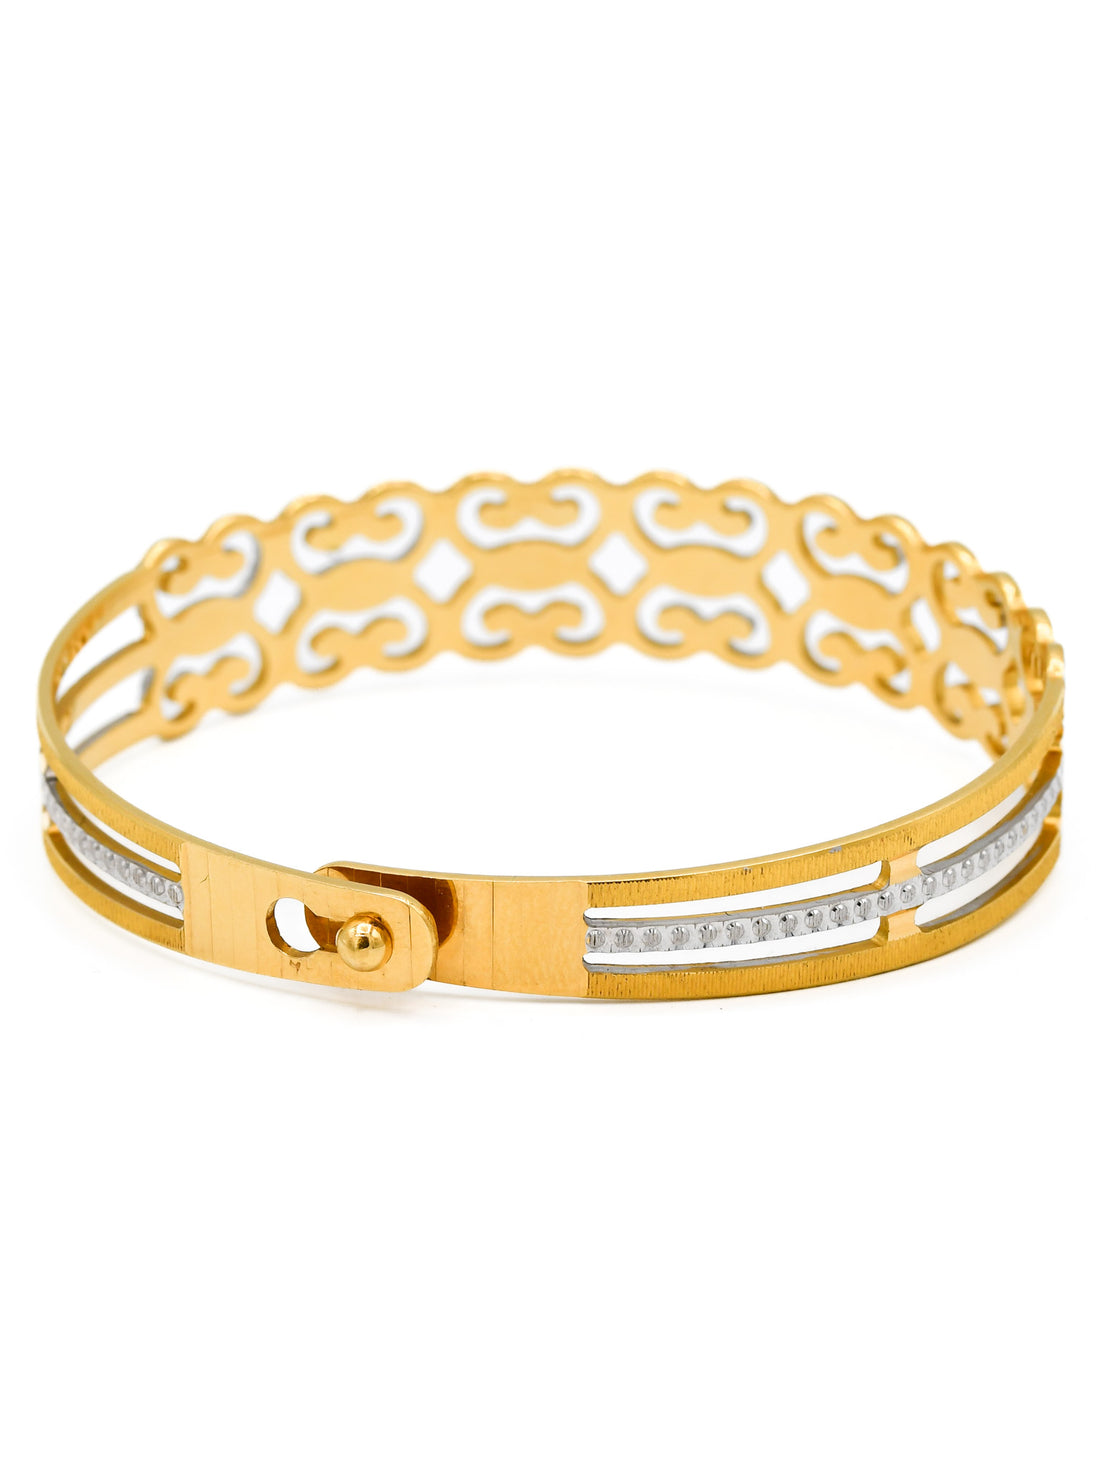 22ct Gold Two Tone 1 Piece Bangle - Roop Darshan